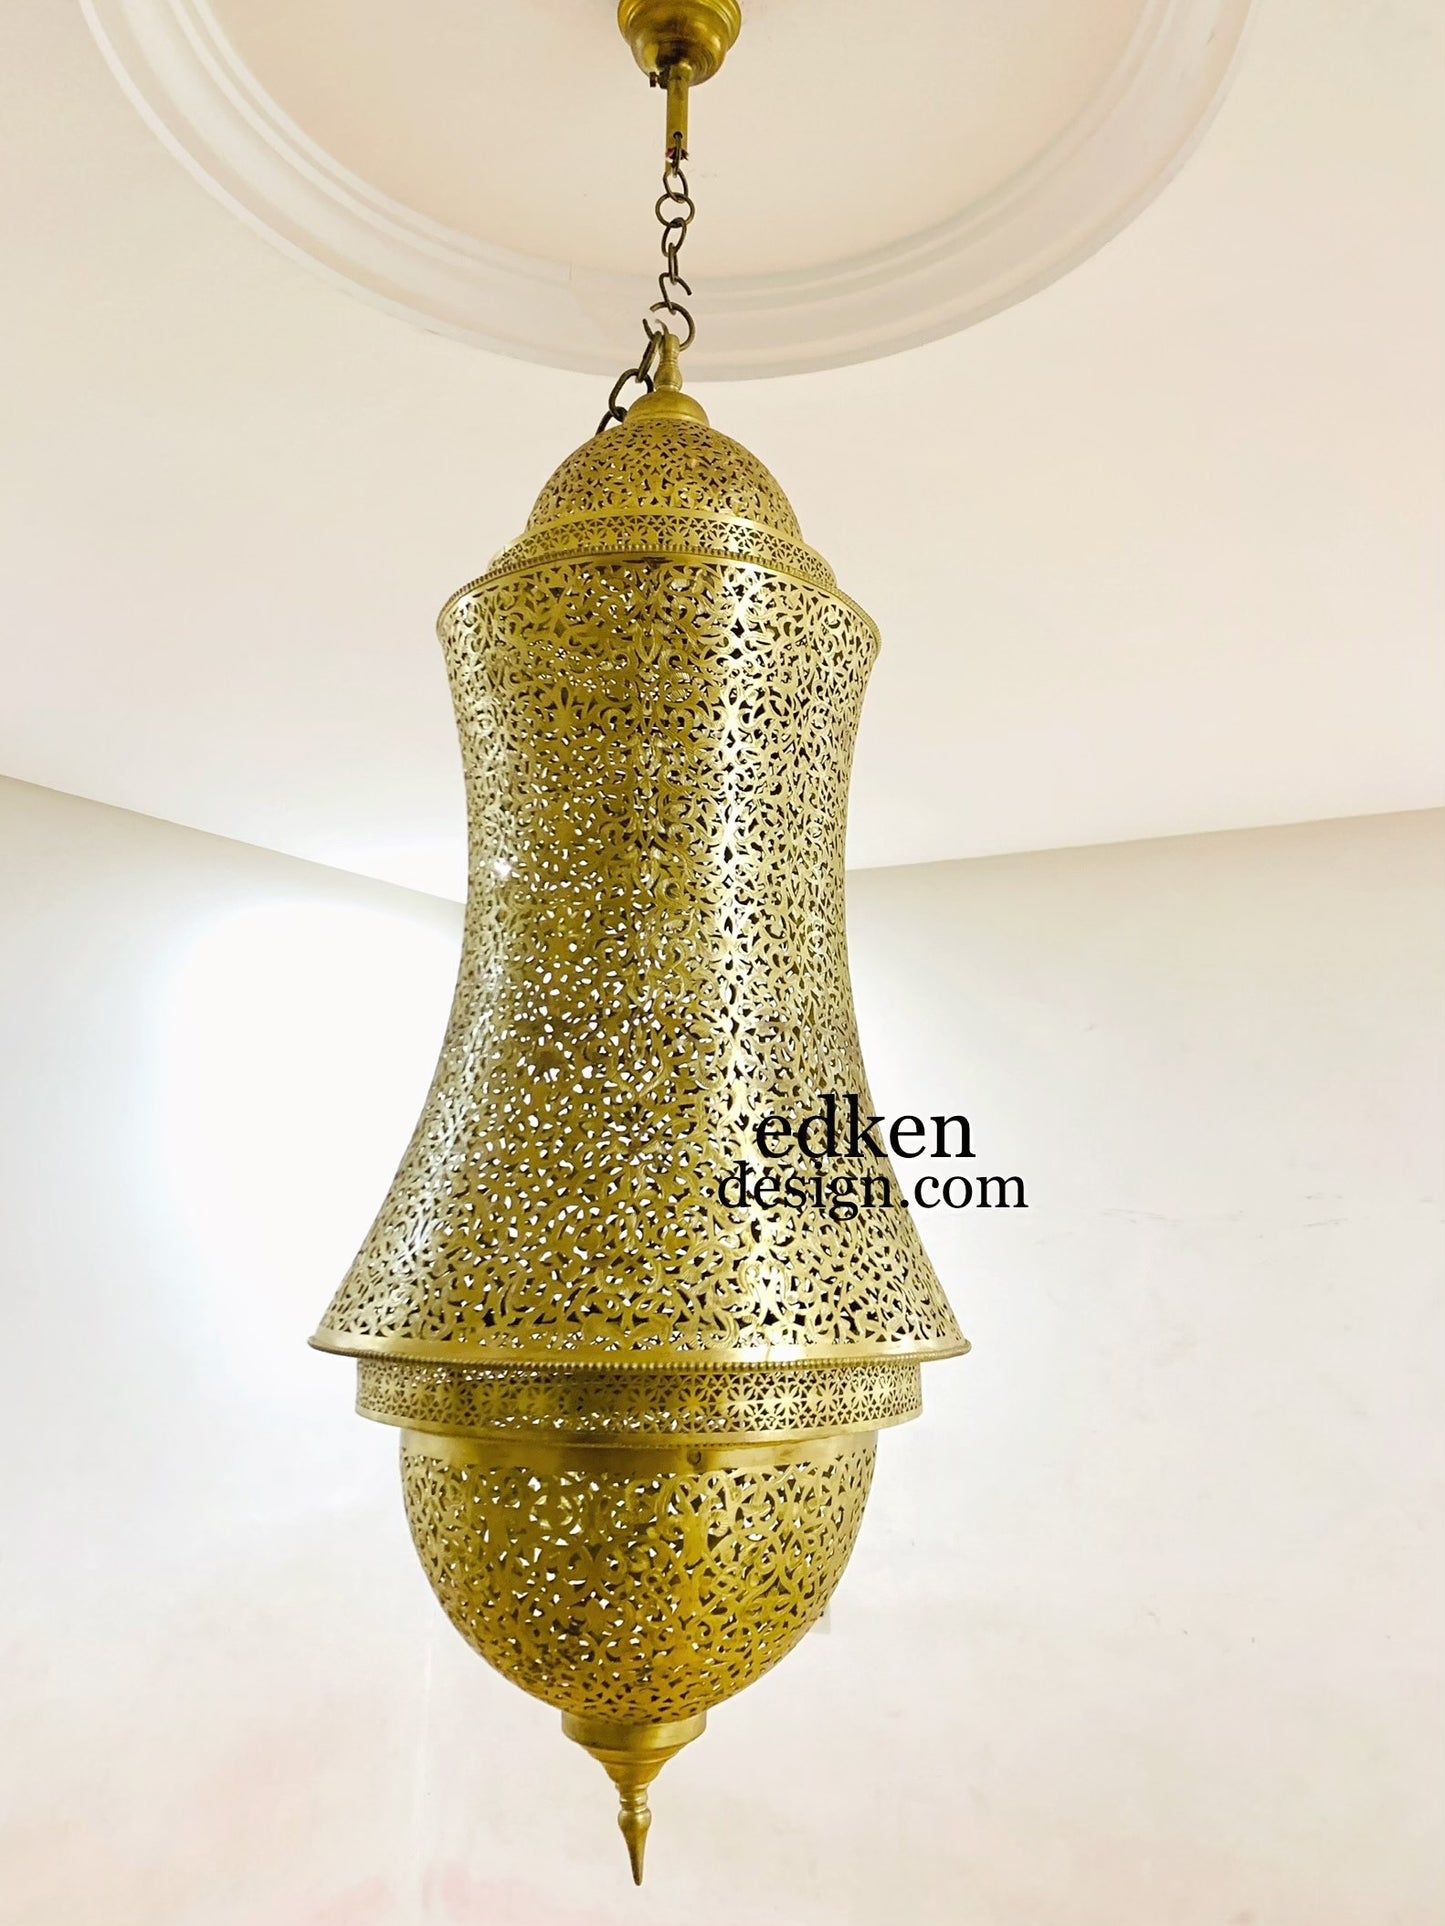 EDKEN LIGHTS - Switched Off Morocco Ceiling Chandelier Large Hanging Lamp Shades Fixture Moorish Lights Handmade Brass in Morocco